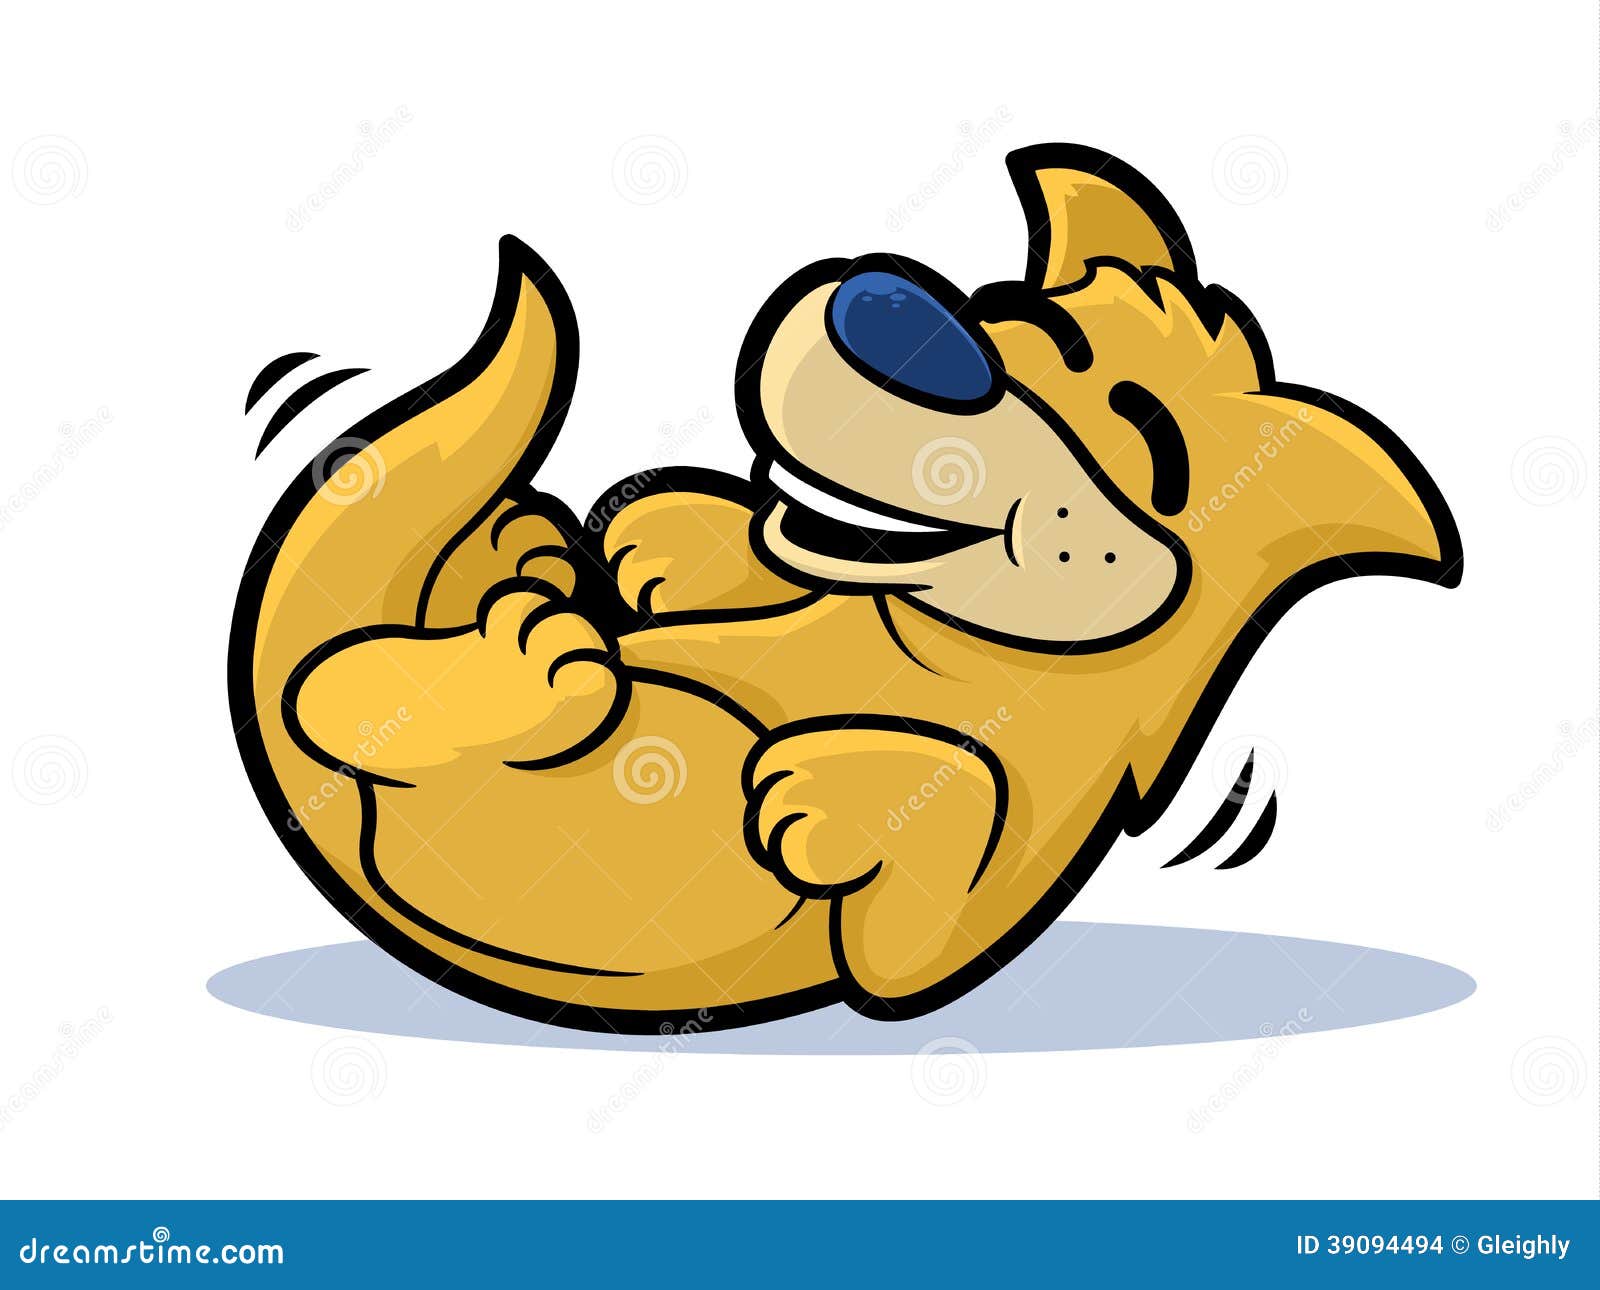 clipart laughter images - photo #50